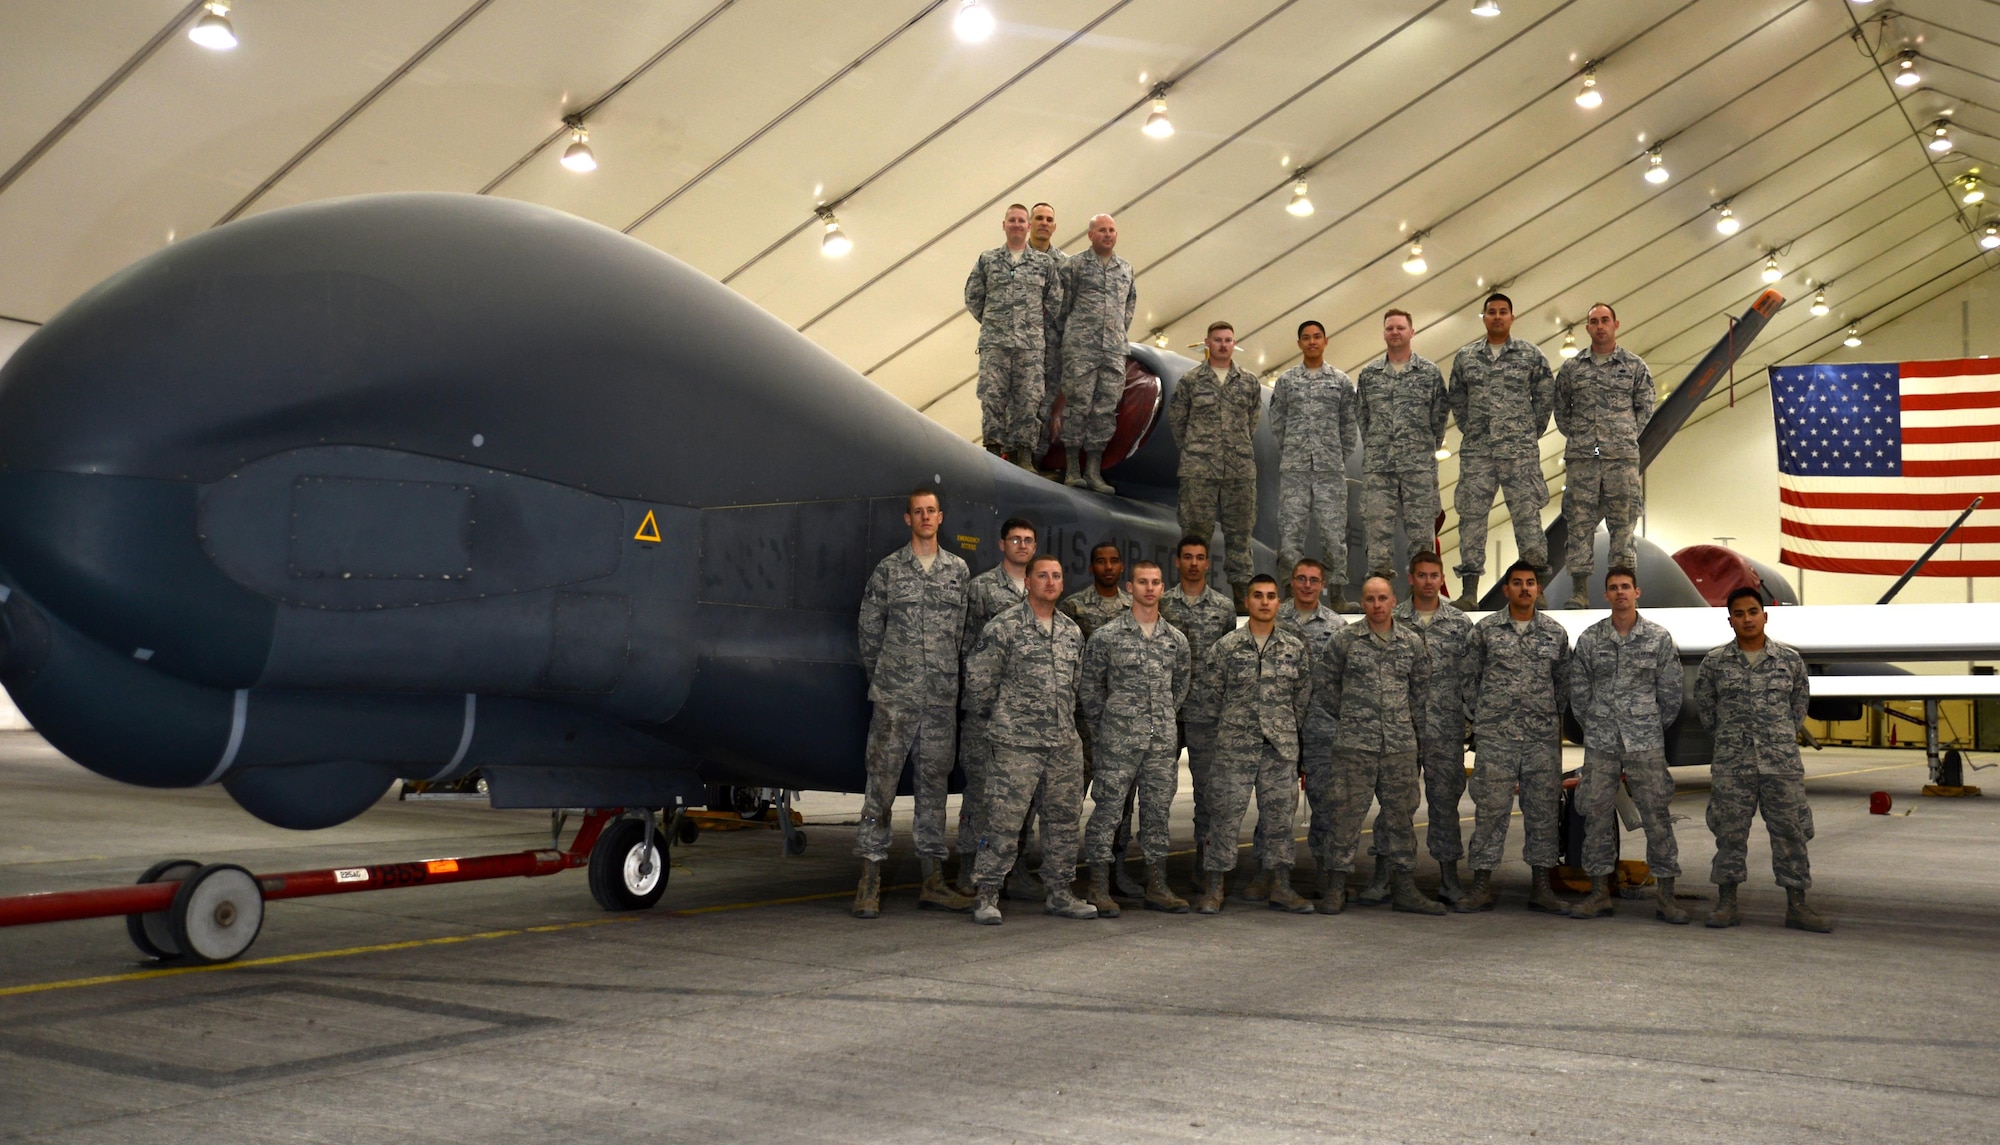 U.S. Airmen assigned to the 380th Expeditionary Aircraft Maintenance Squadron stand next to ‘Workhorse’ an EQ-4 Global Hawk unmanned aircraft at an undisclosed location in Southwest Asia, Nov. 11, 2015. The Global Hawk marked history when it landed for its 500 sortie milestone, and with nearly 13,000 flight hours logged, this weapon system is lived up to the nickname “Workhorse”. (U.S. Air Force photo by Tech. Sgt. Frank Miller/Released)